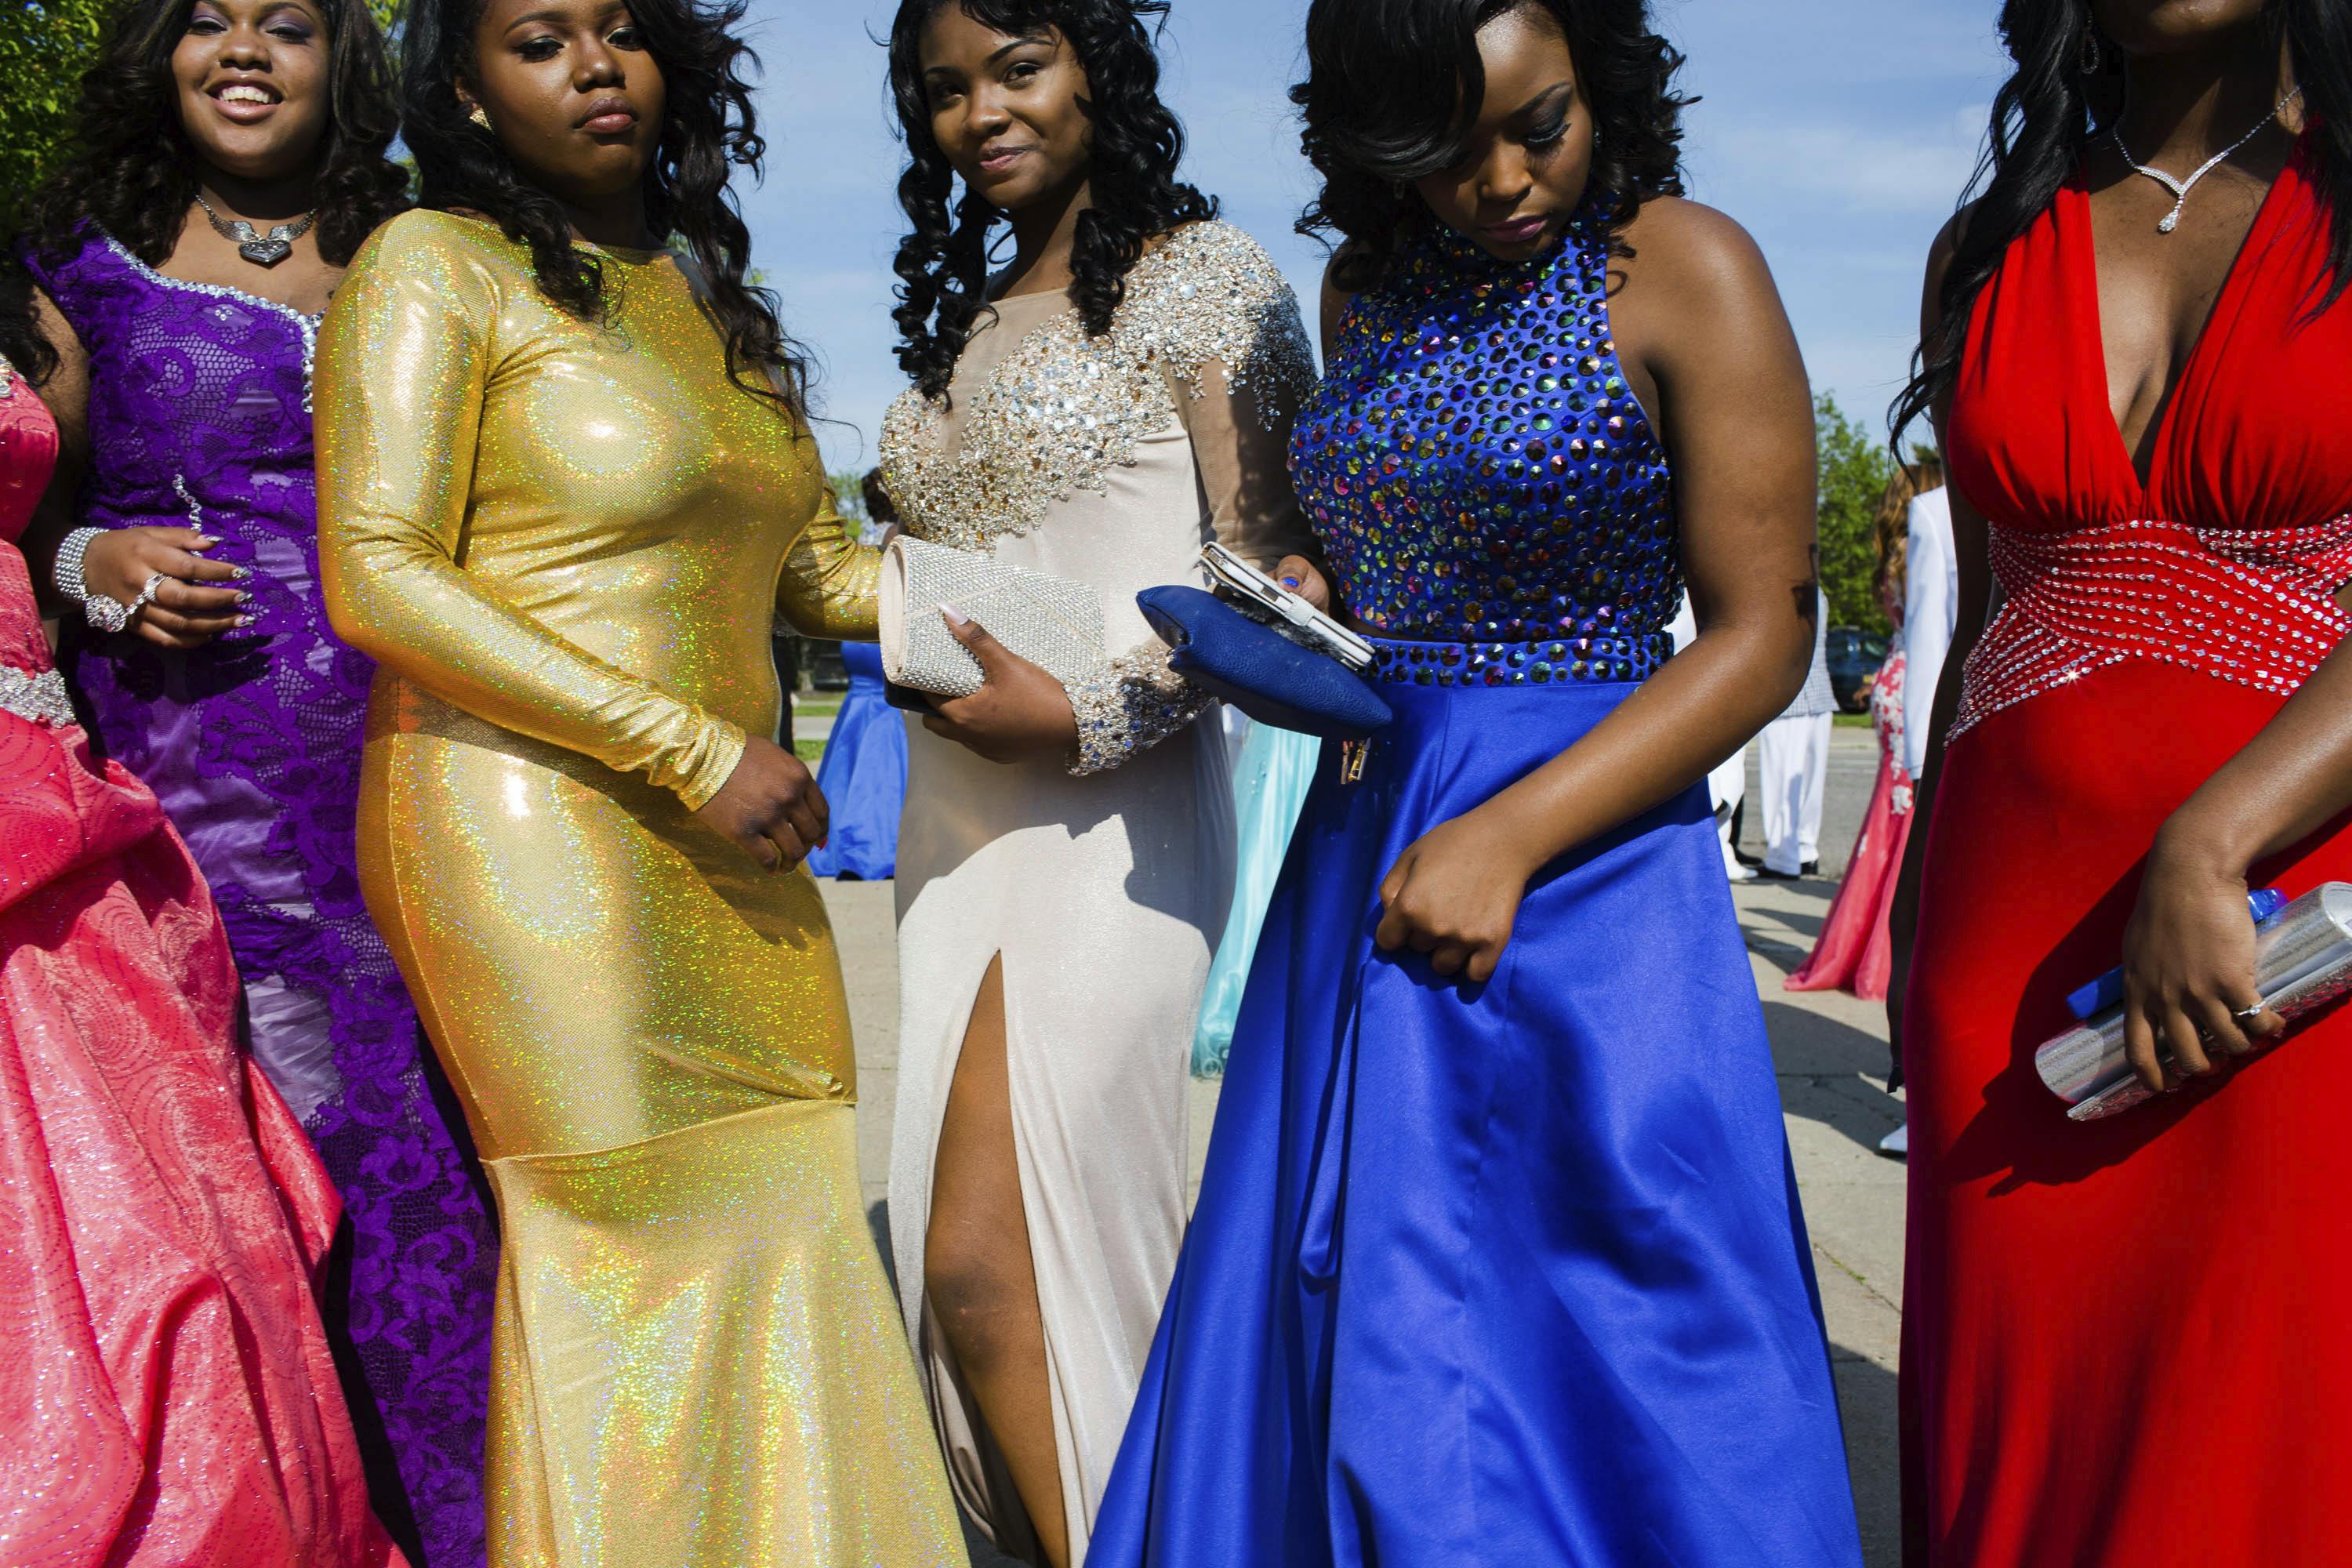 Photo of Flint is a place showing 6 women in their dresses